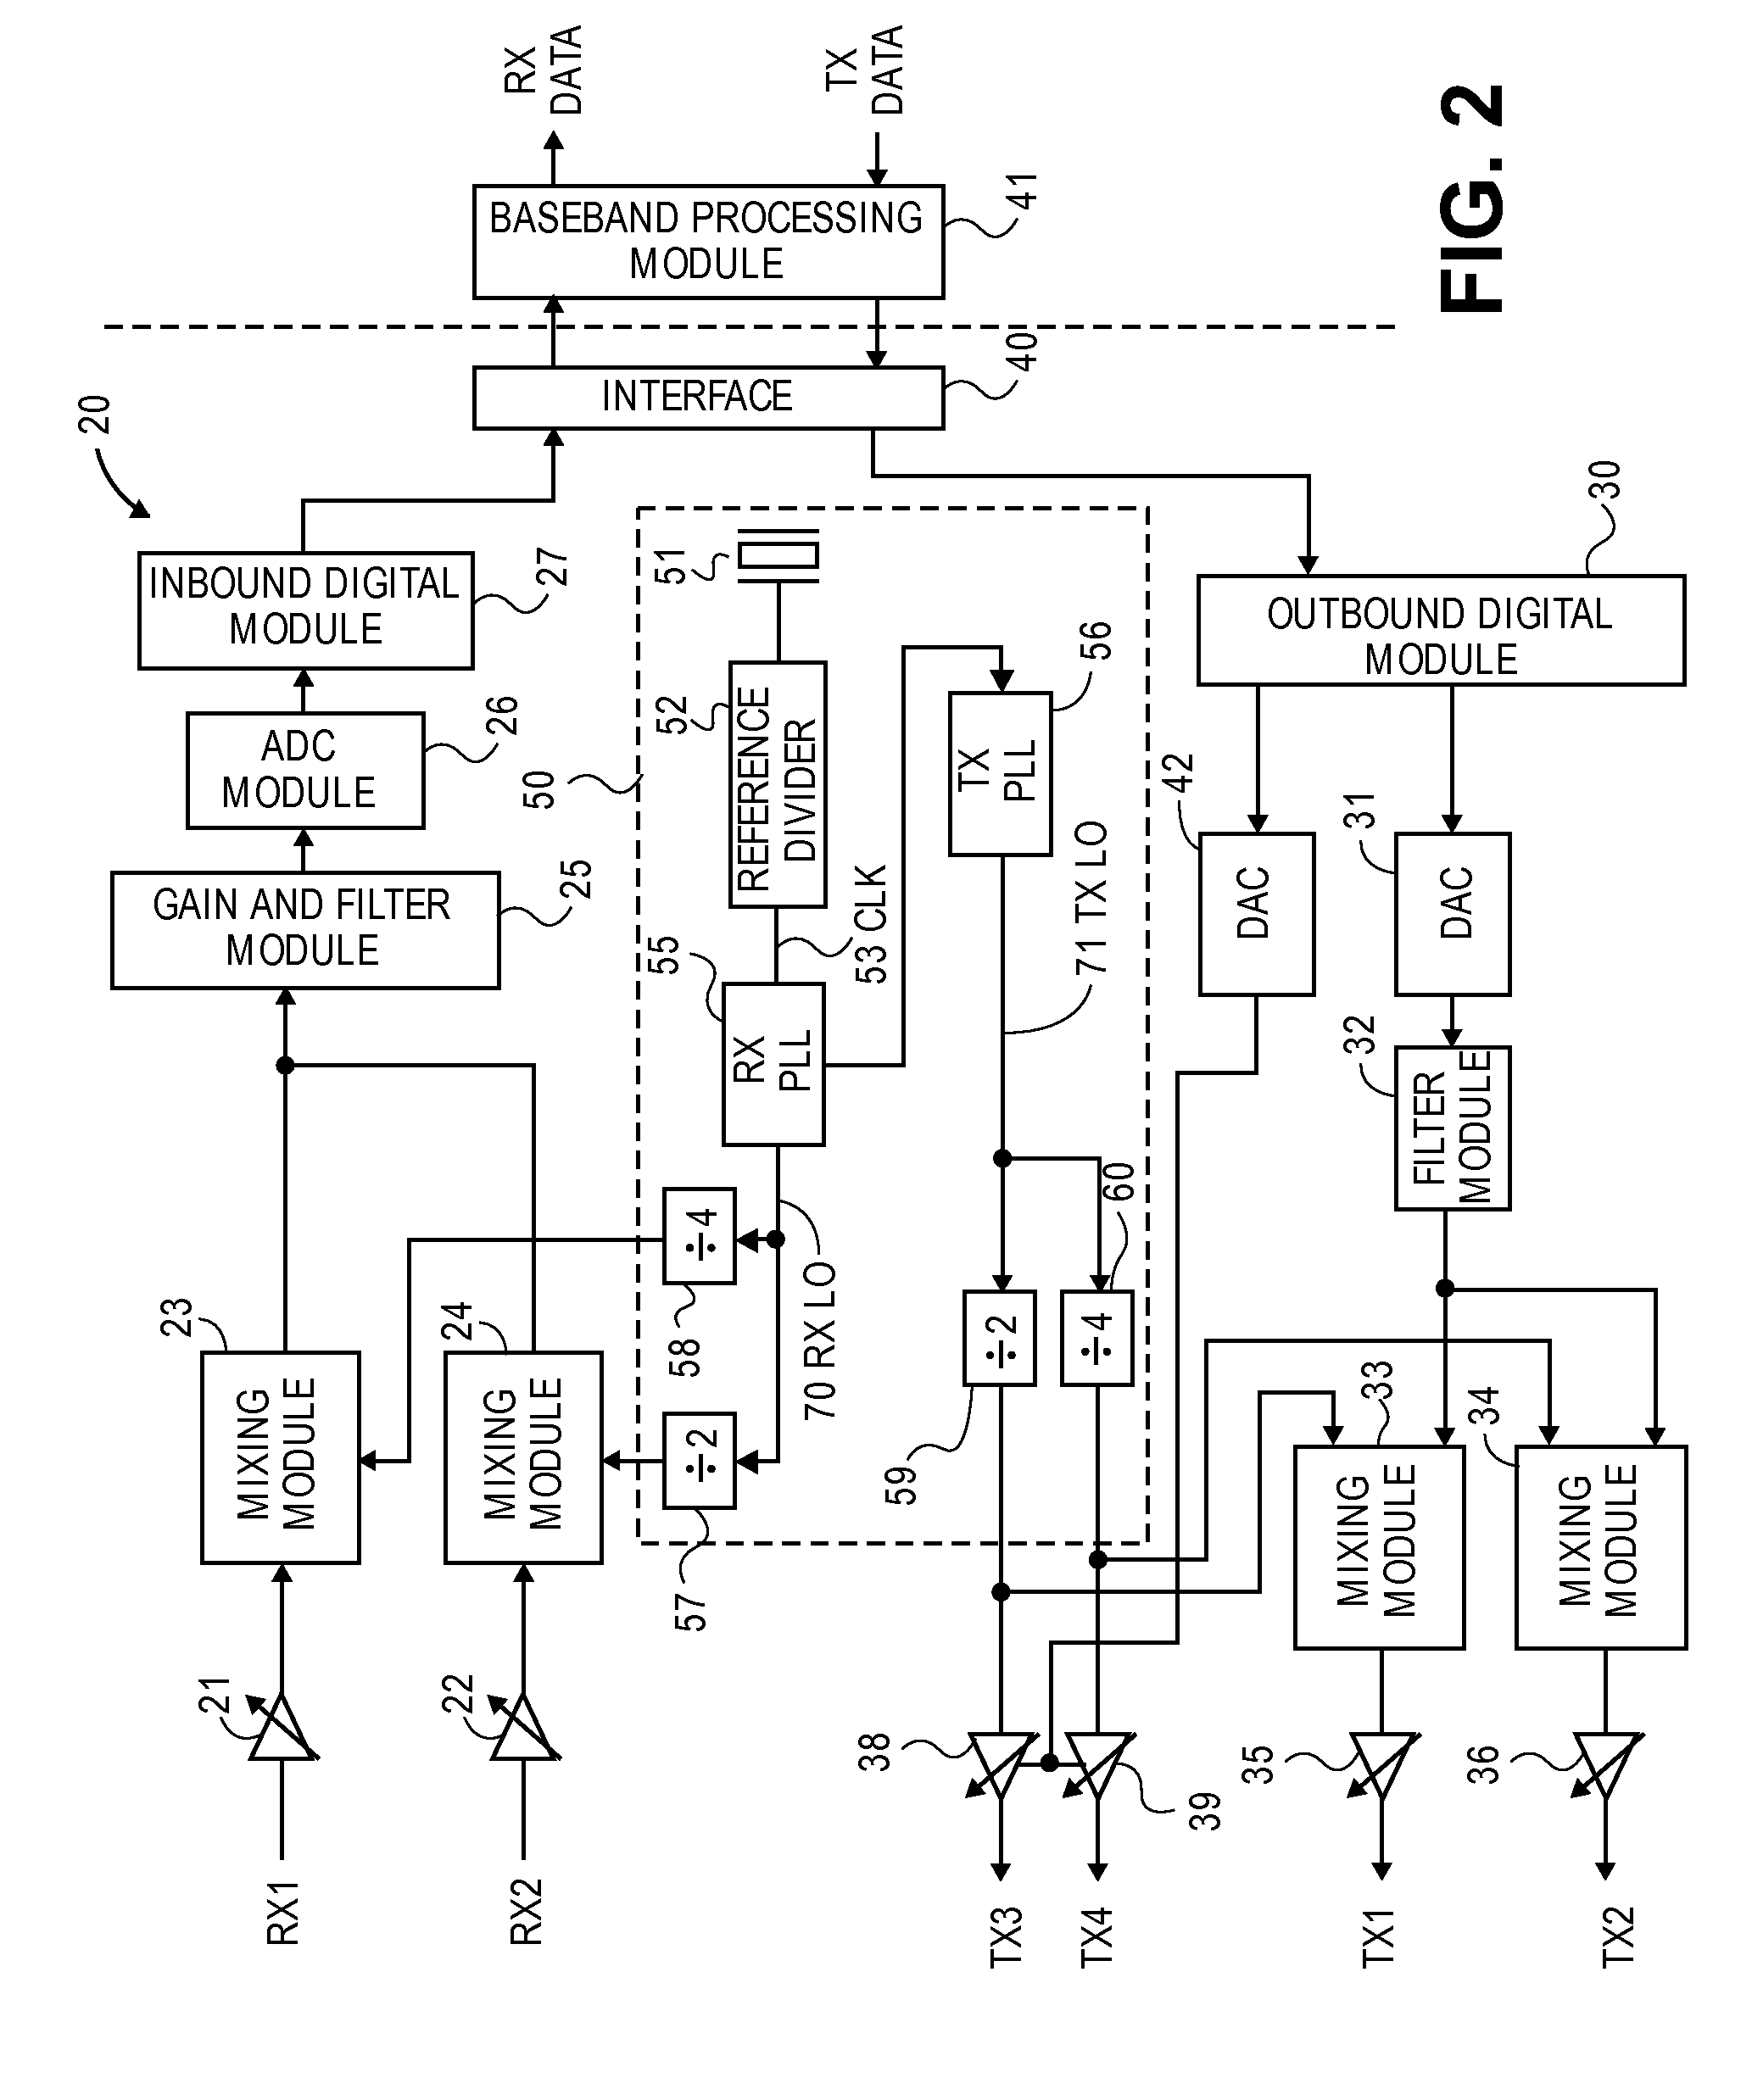 Low power frequency division and local oscillator generation